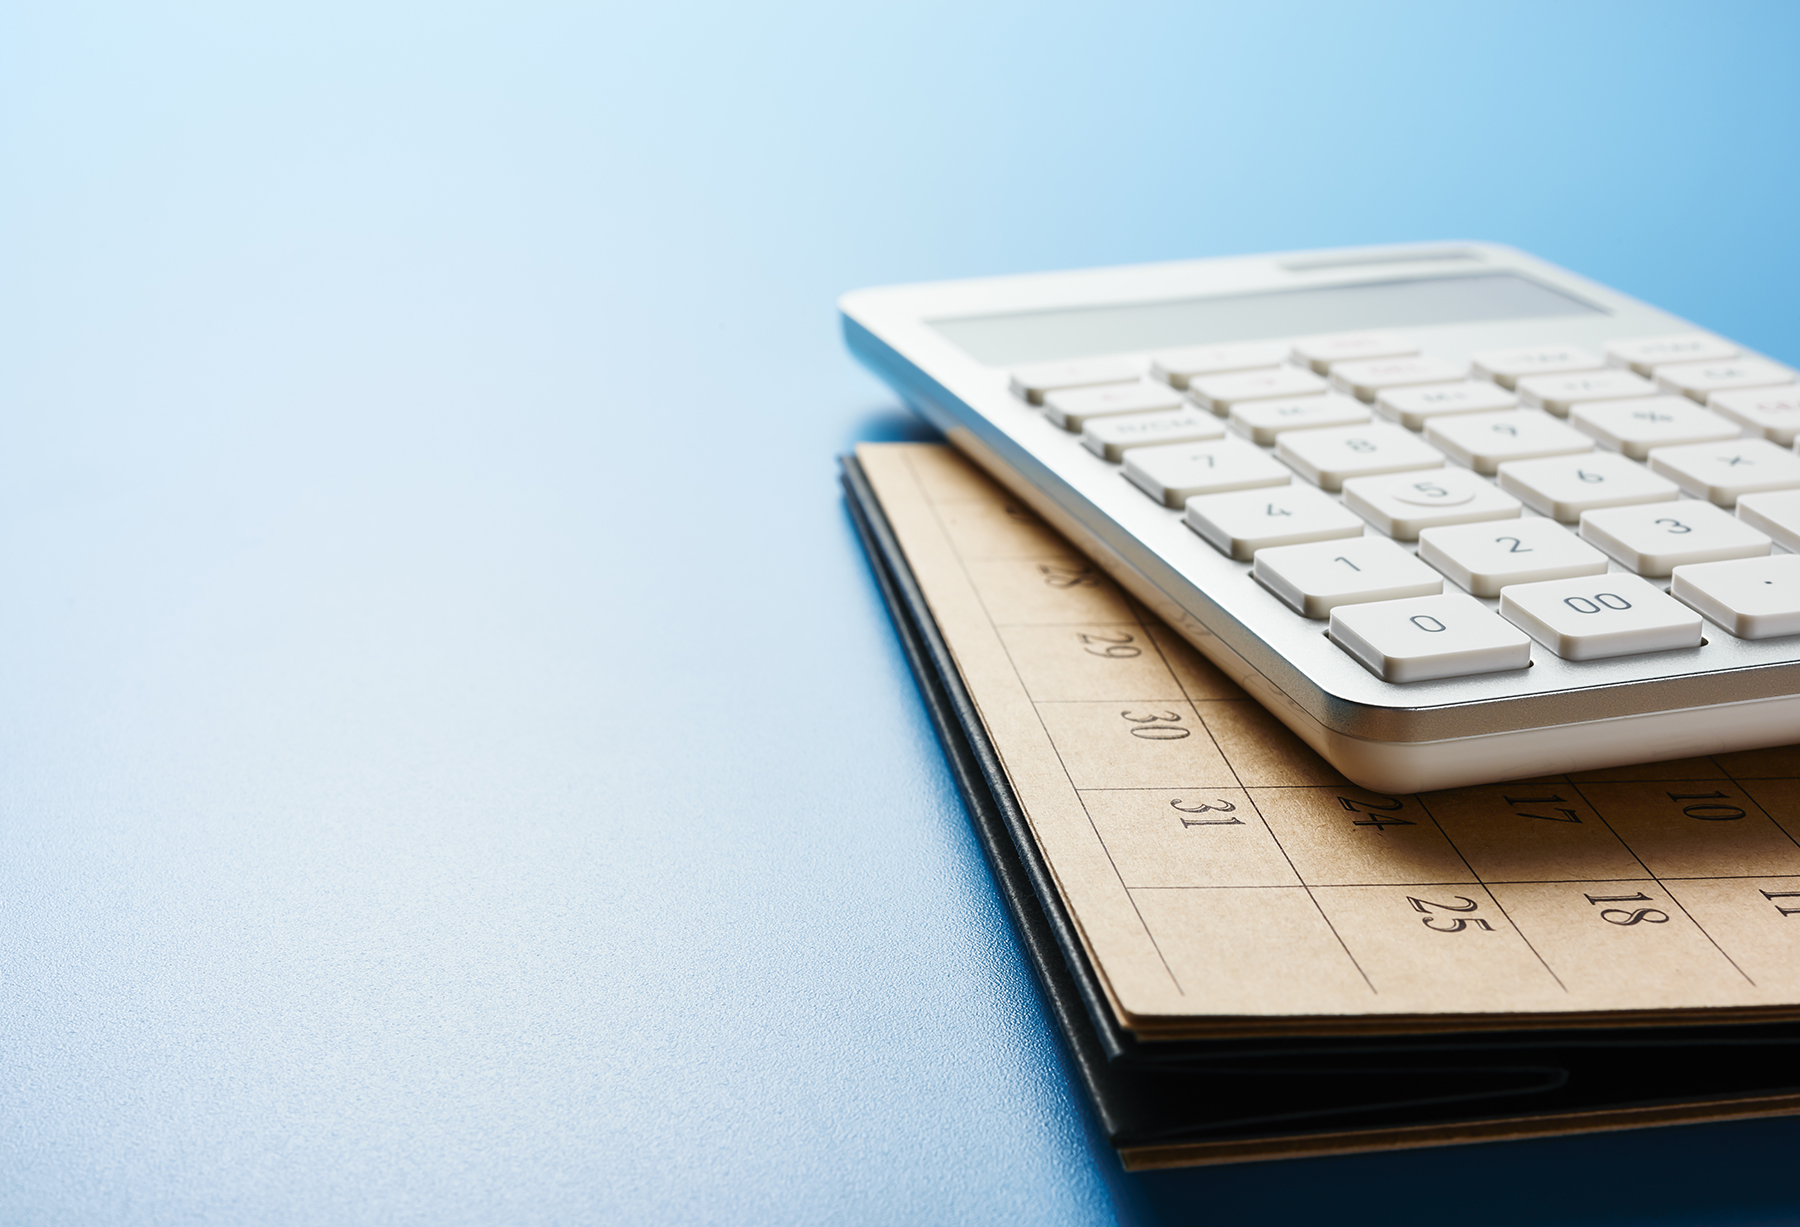 A calculator rests on top of a notebook against a blue background.